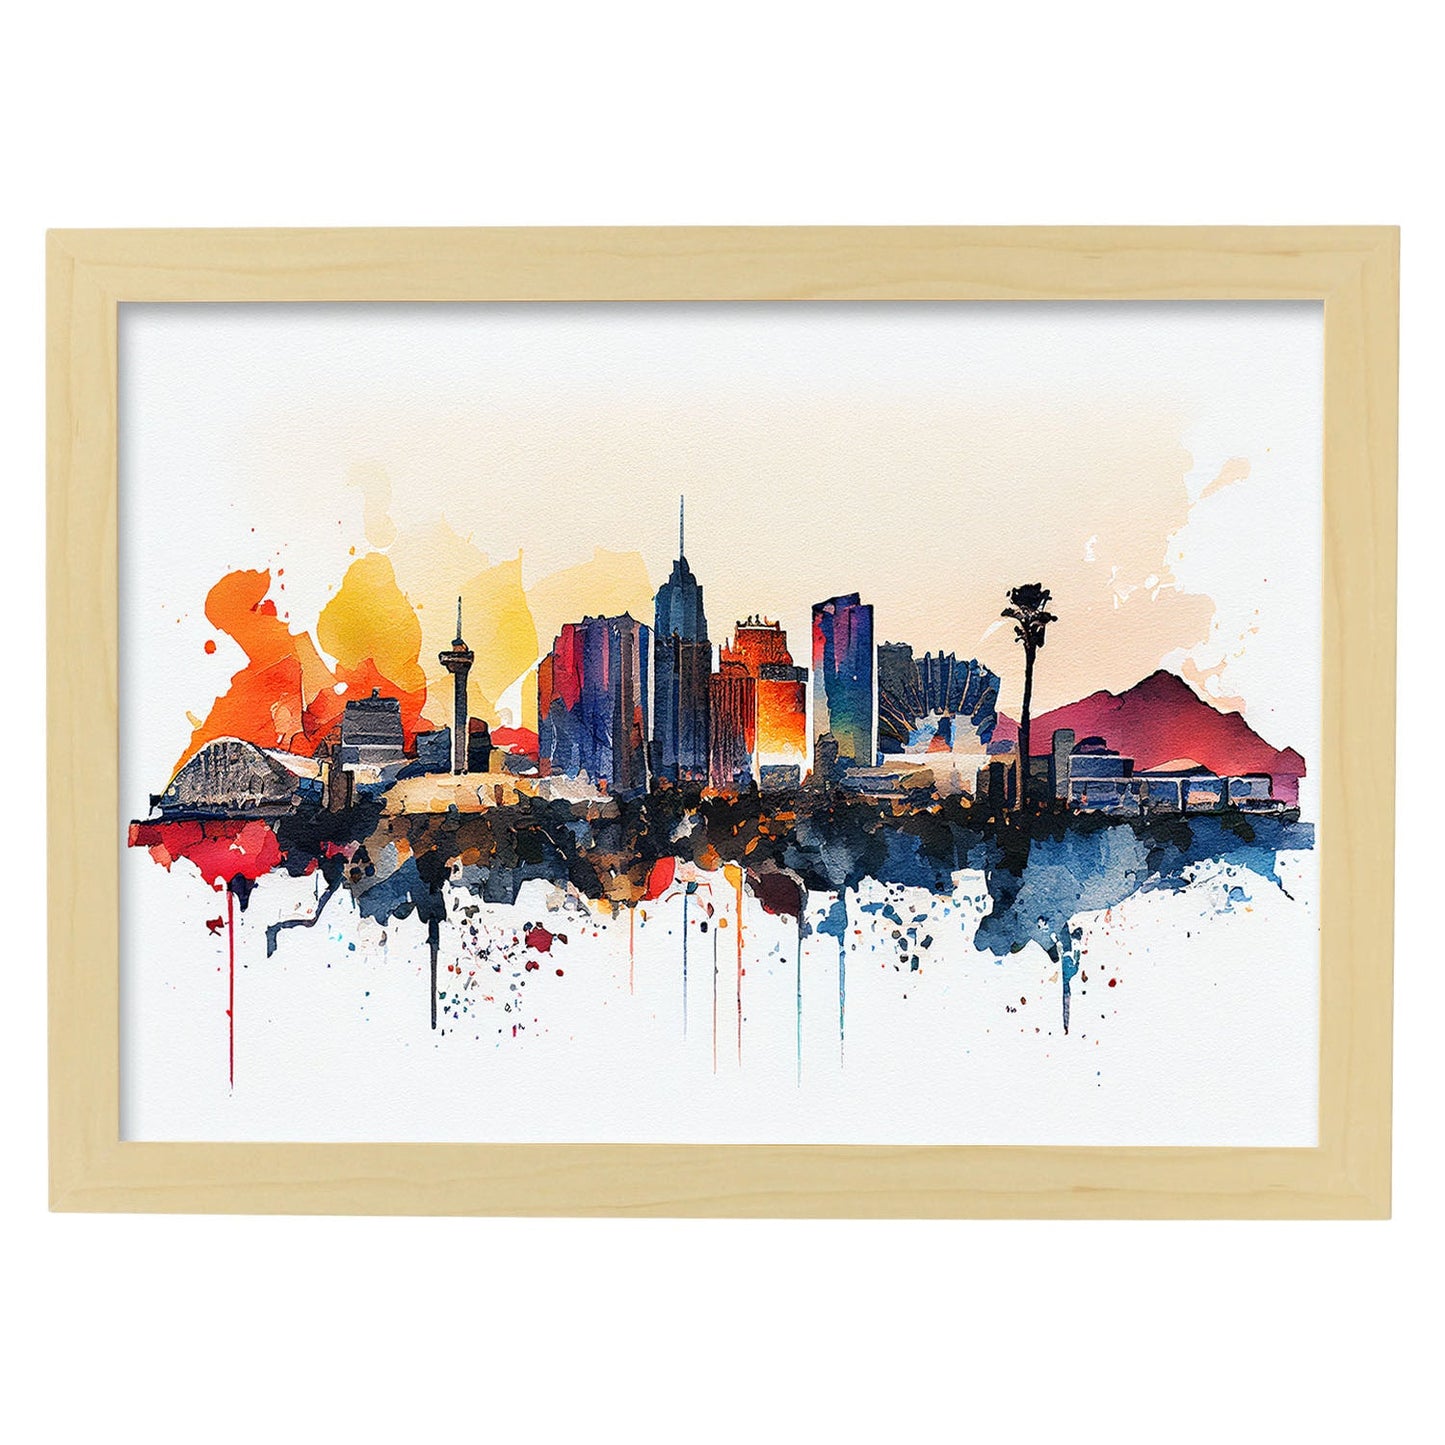 Nacnic watercolor of a skyline of the city of Las Vegas_1. Aesthetic Wall Art Prints for Bedroom or Living Room Design.-Artwork-Nacnic-A4-Marco Madera Clara-Nacnic Estudio SL